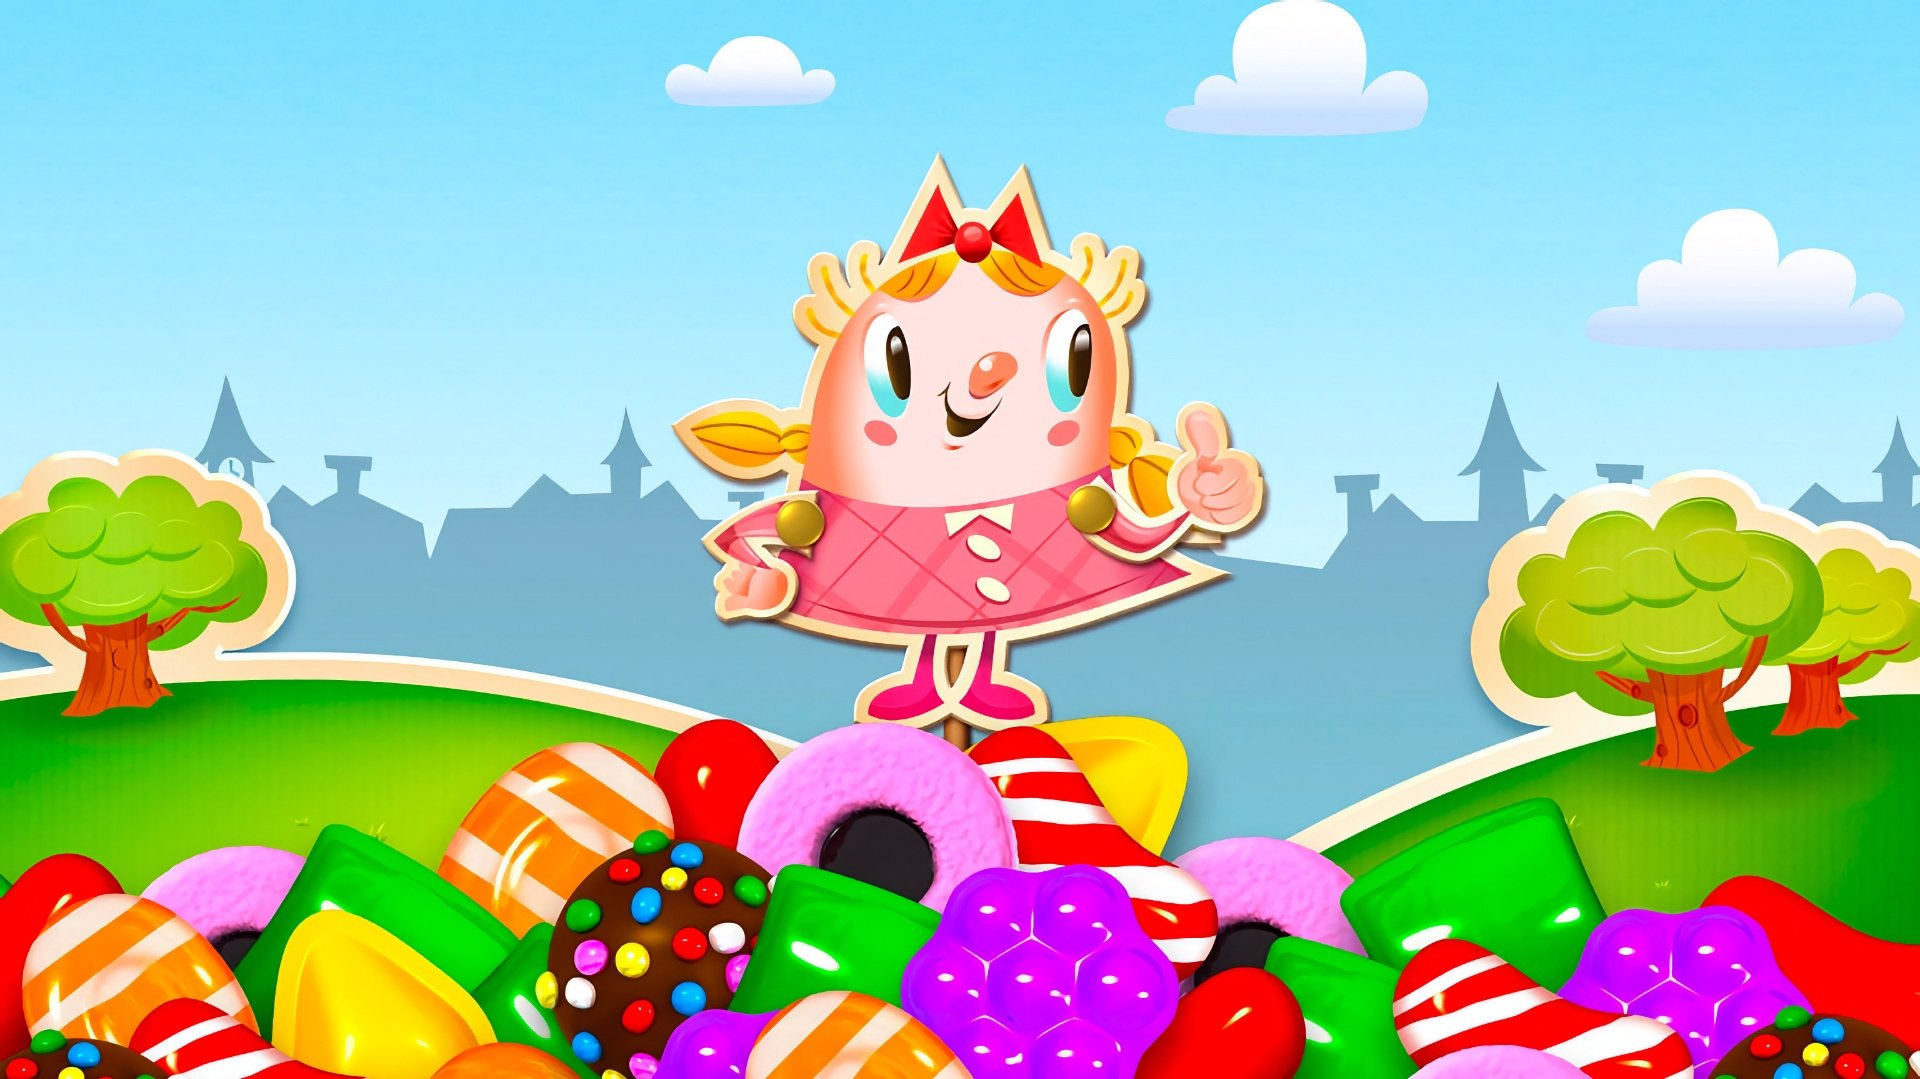 Sweet! Candy Crush Saga to come pre-loaded on Windows 10, The Independent